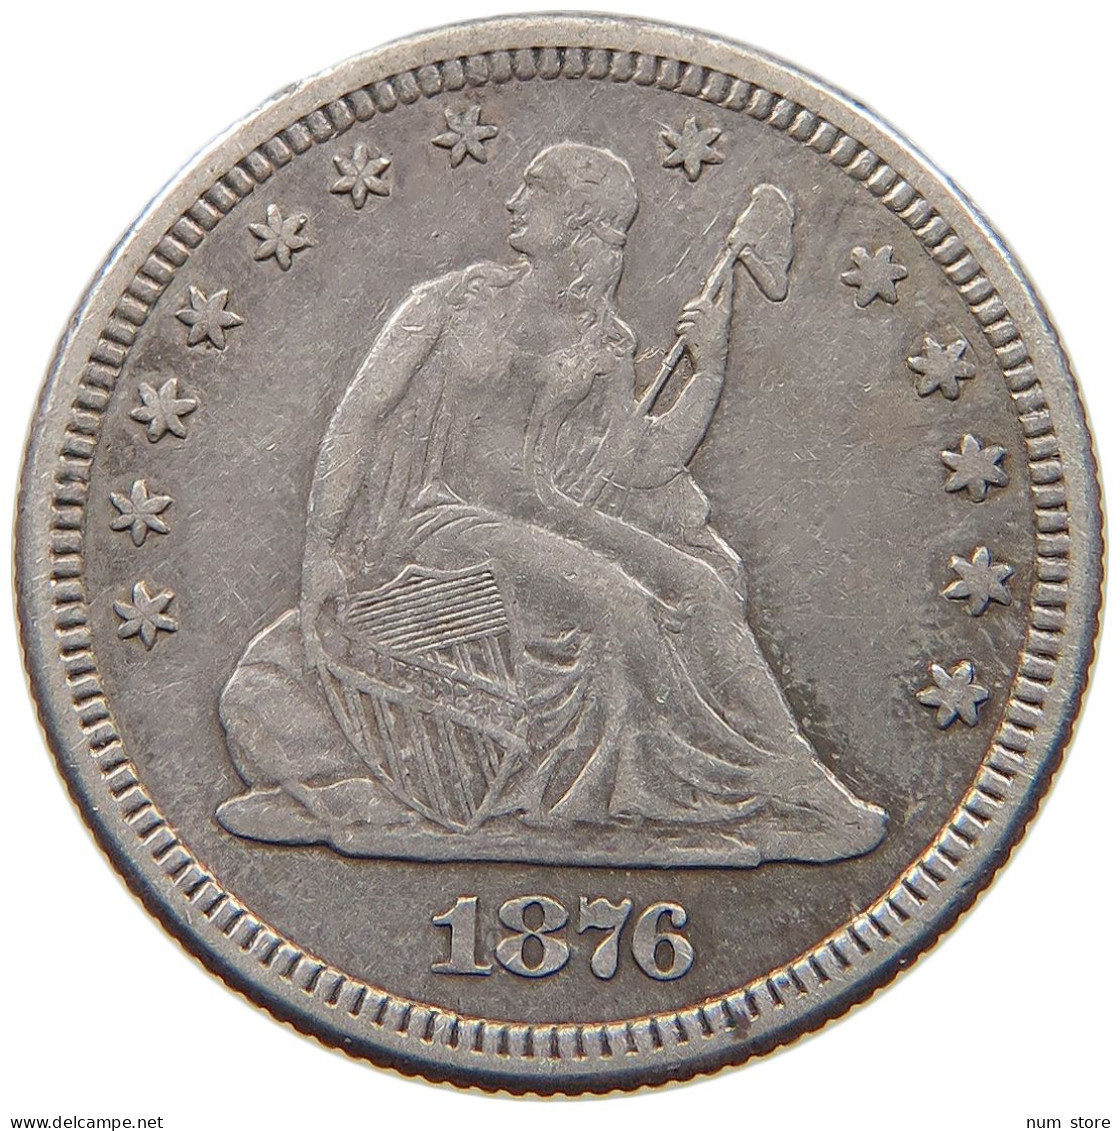 UNITED STATES OF AMERICA QUARTER 1876 SEATED LIBERTY #t107 0311 - 1838-1891: Seated Liberty